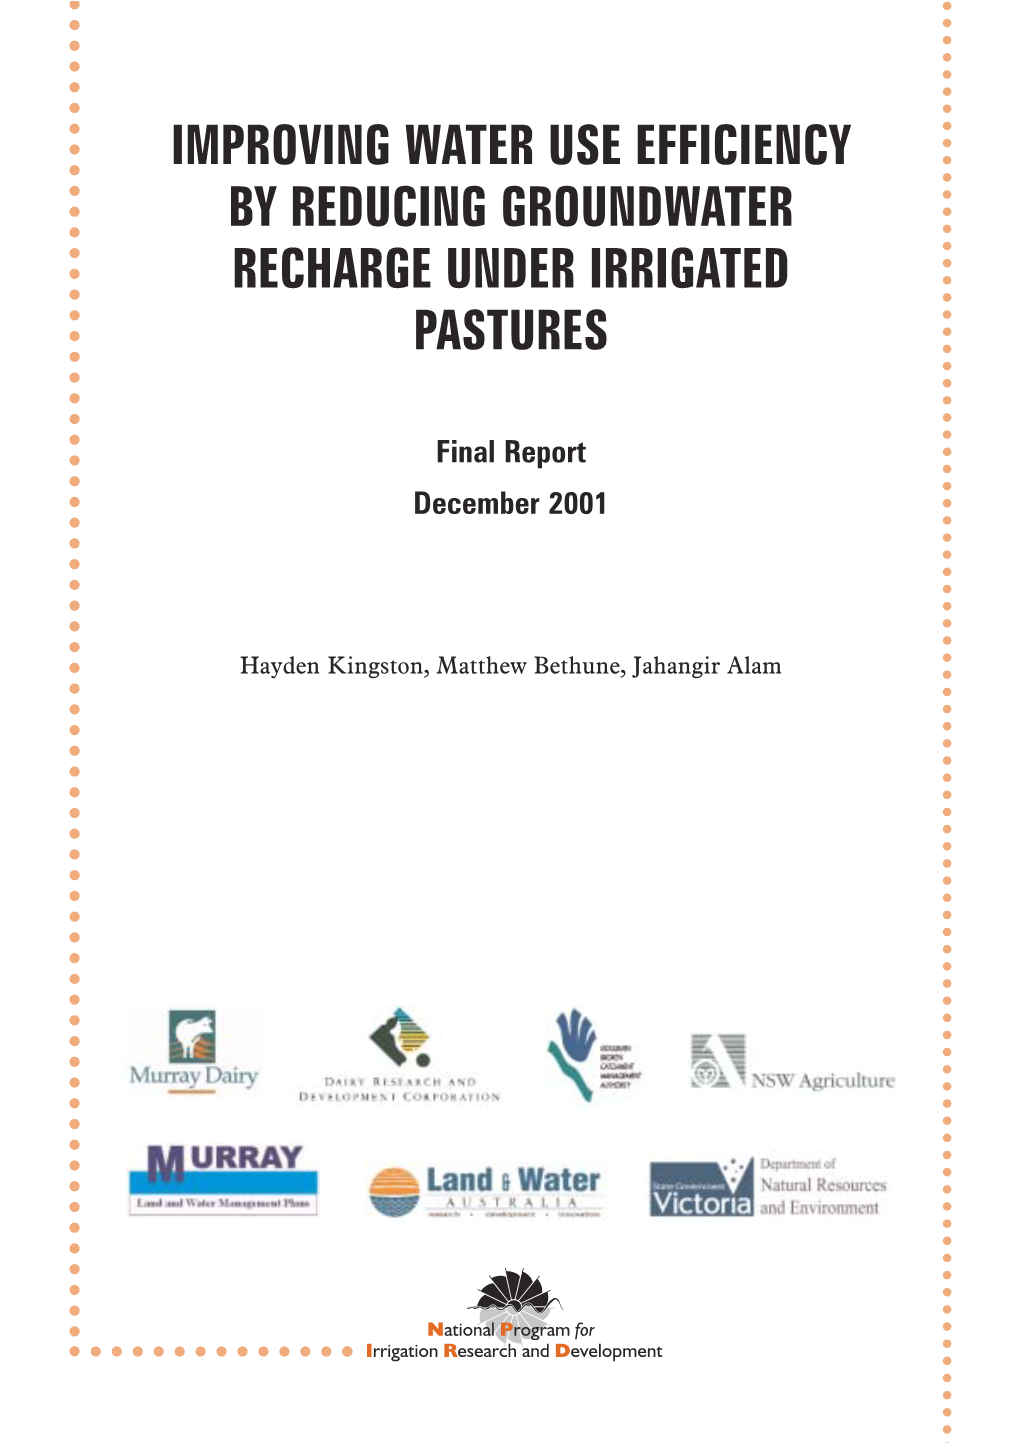 Improving Water Use Efficiency by Reducing Groundwater Recharge Under Irrigated Pastures